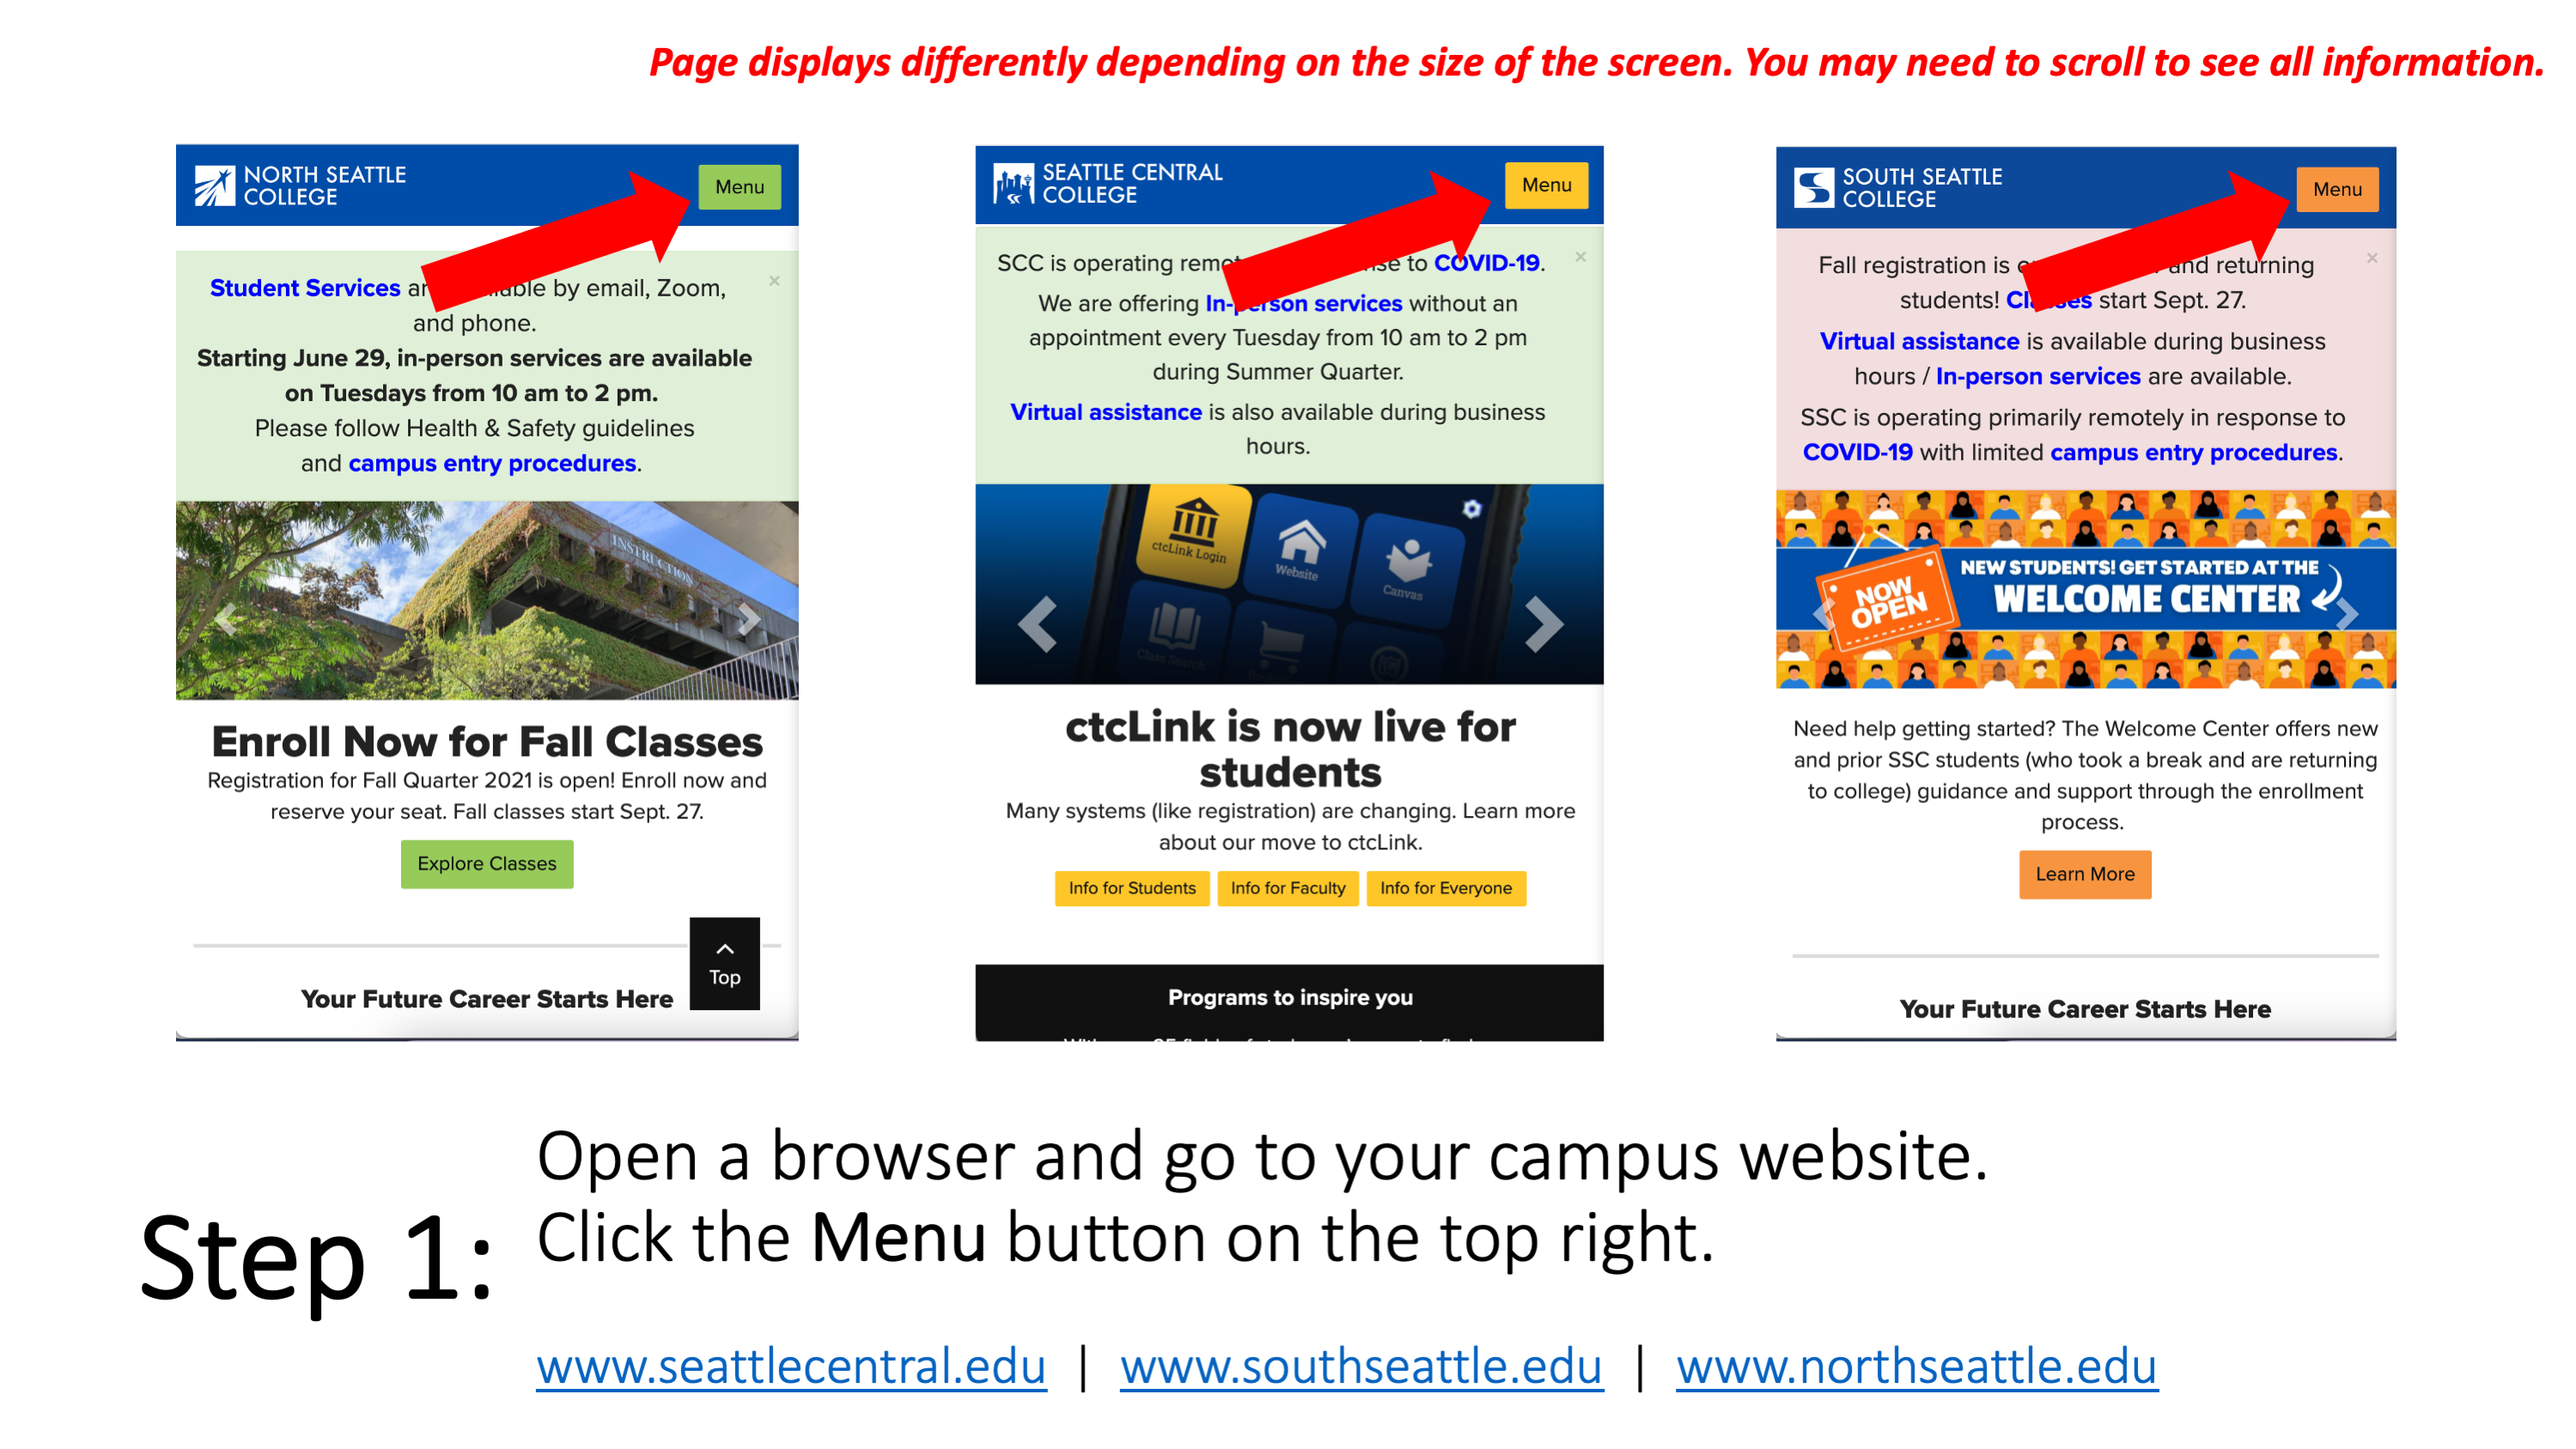 Step 1: Open a browser and go to your campus website. Click the Menu button on the top right. www.seattlecentral.edu , www.southseattle.edu , or www.northseattle.edu